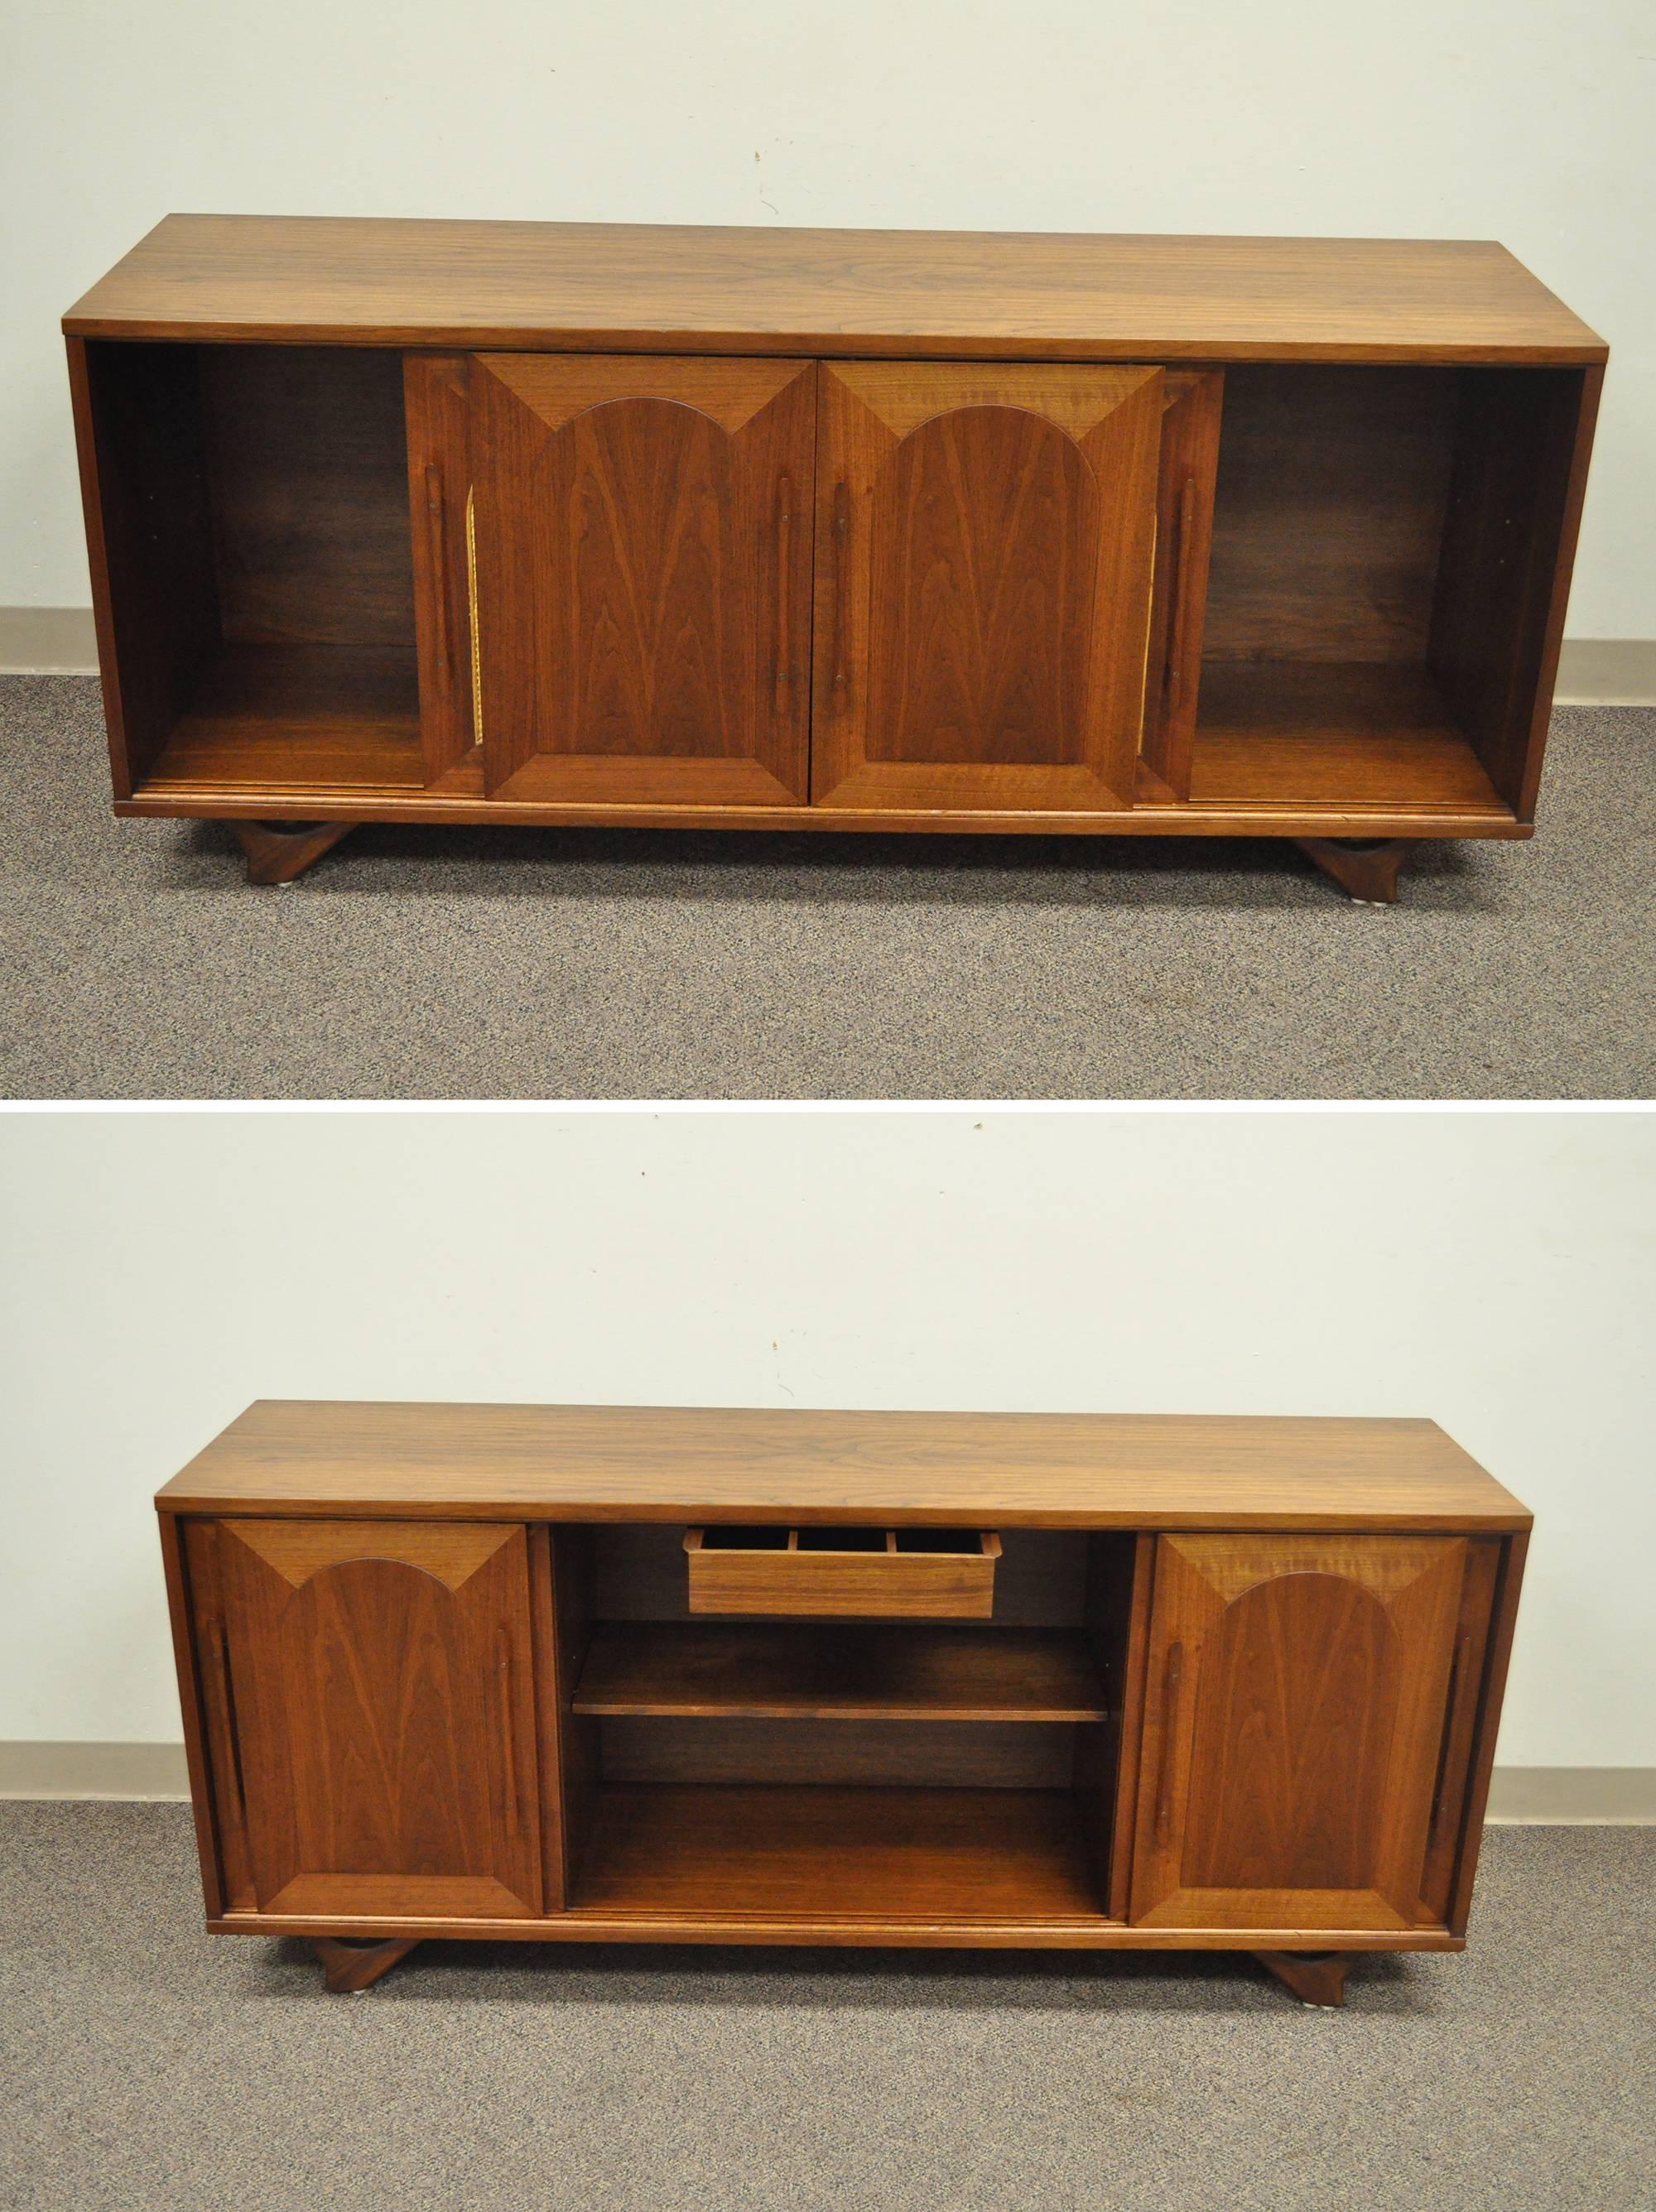 Vintage Mid-Century Danish modern walnut and cane sliding door credenza cabinet. Item features beautiful wood grain, four sliding doors, two doors with arched cane panels, adjustable interior shelf, single drawer with unique wood joinery, sculpted